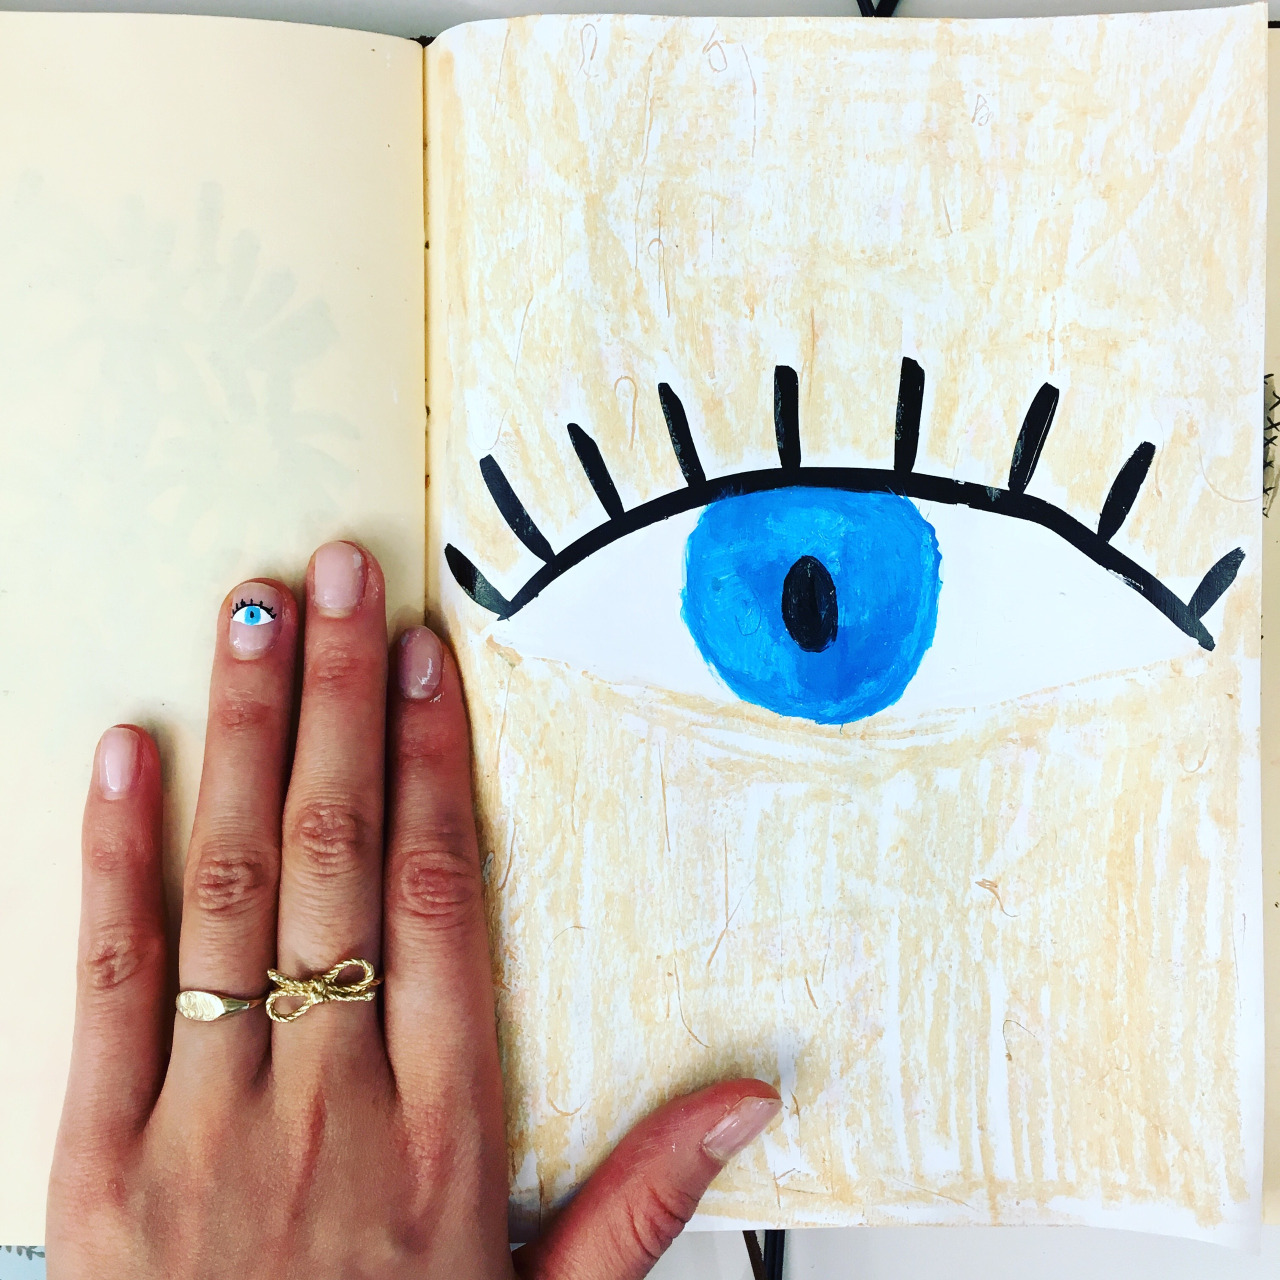 sketchbook with nail art